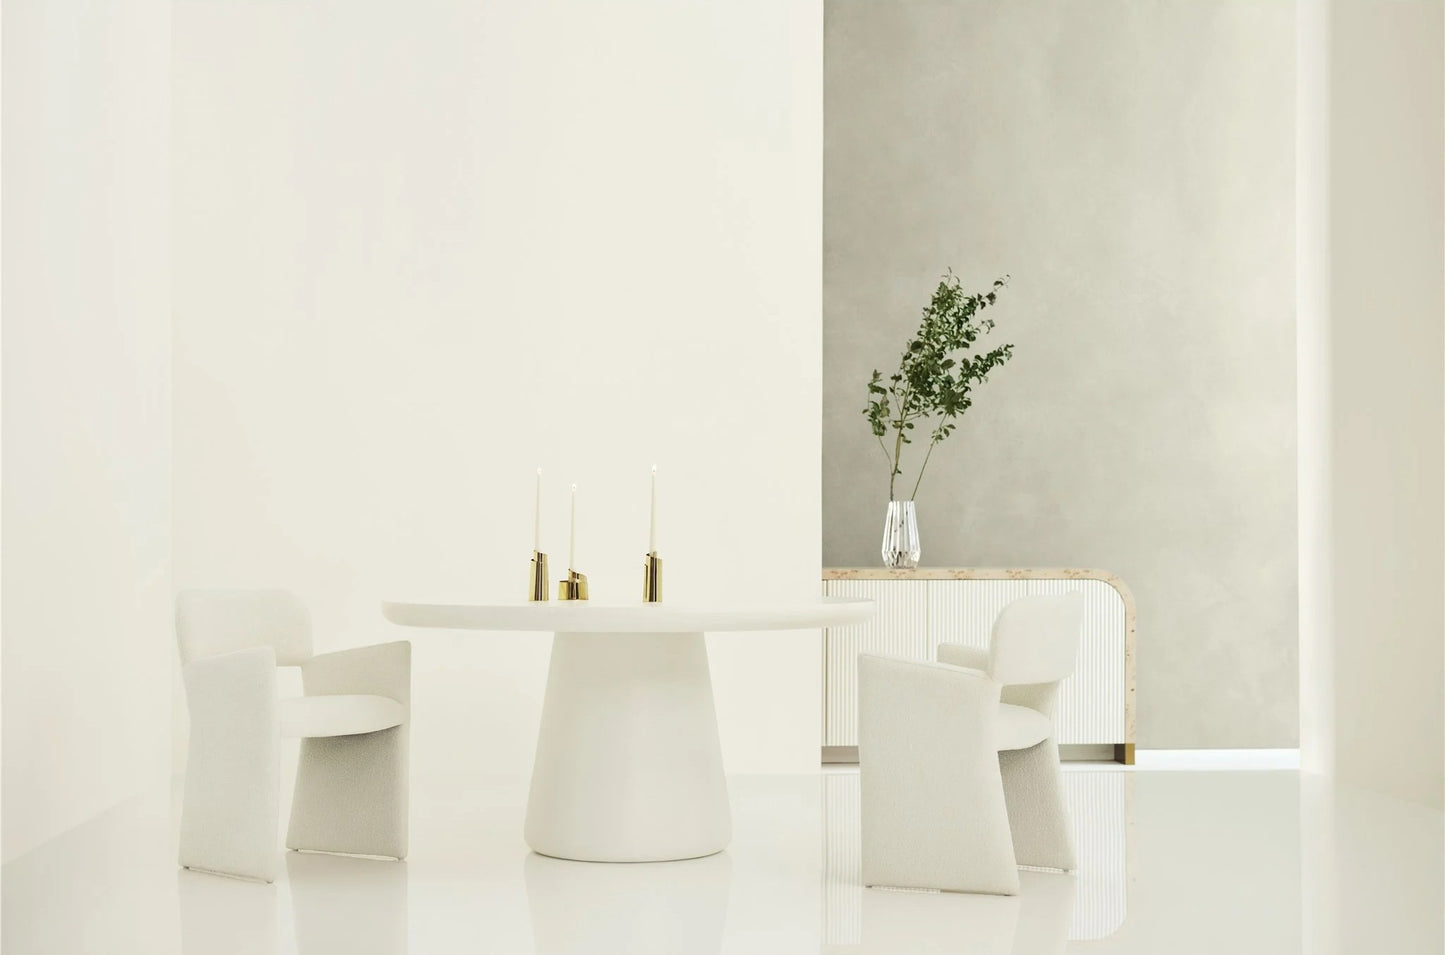 Truffle Round Dining Table